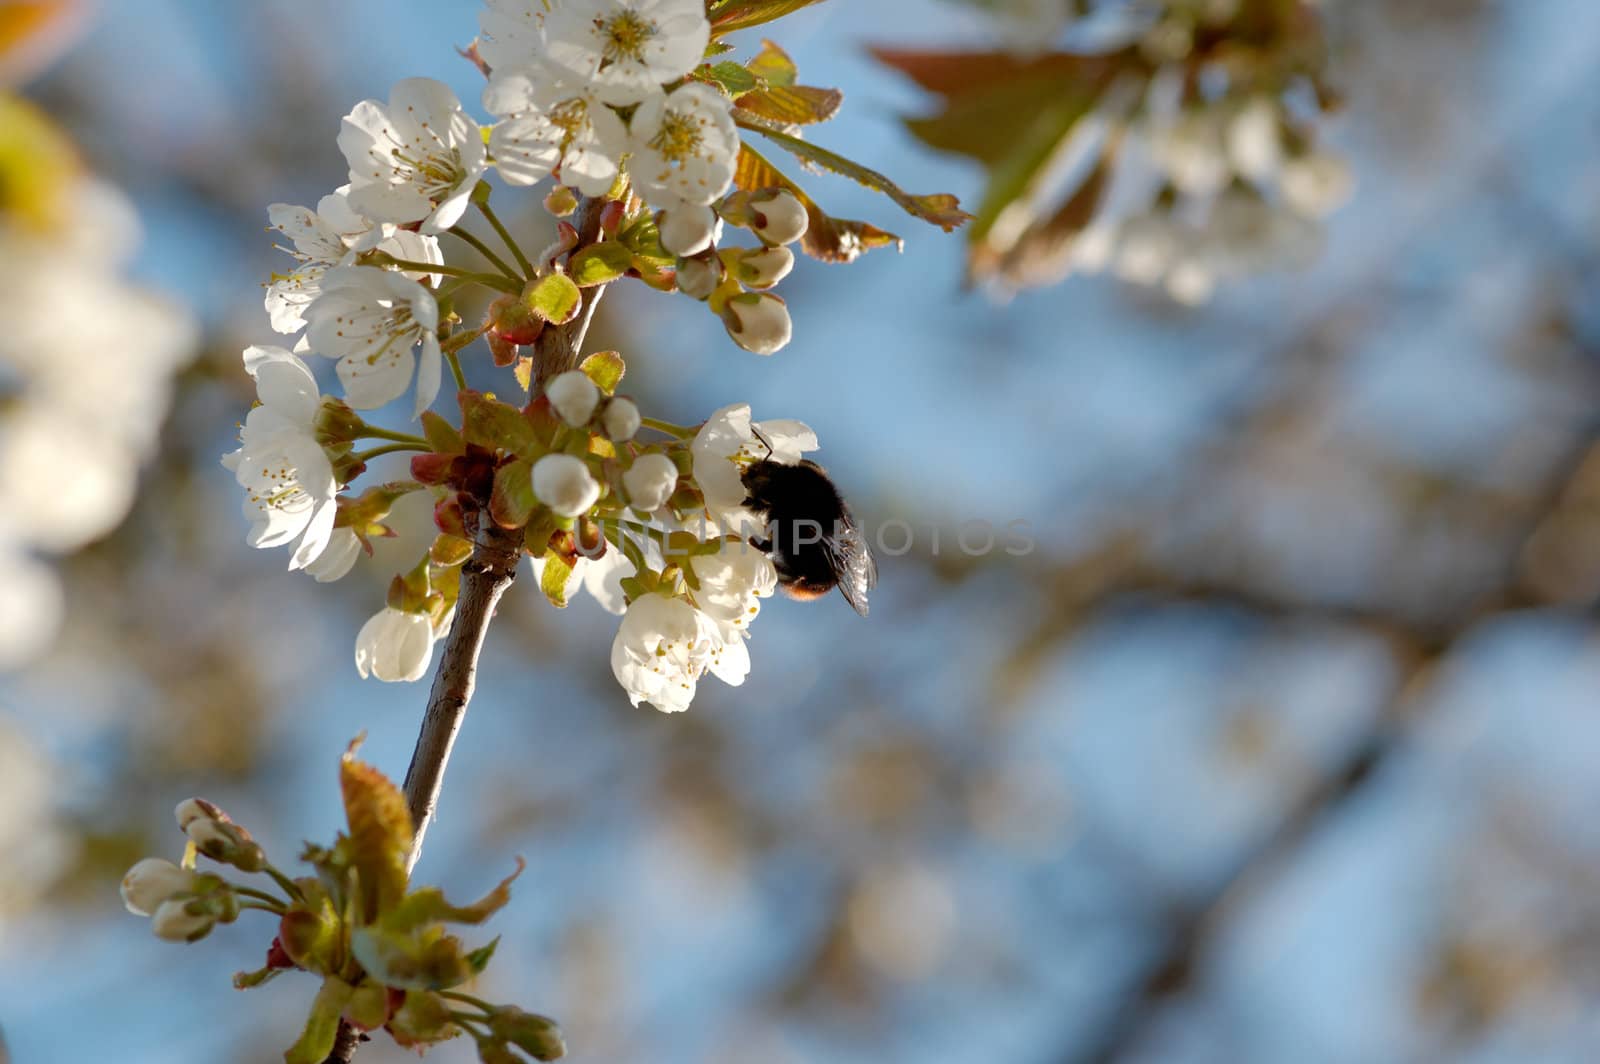 A macro image of a bumblebee drinking nectar from a cherry blossom.
